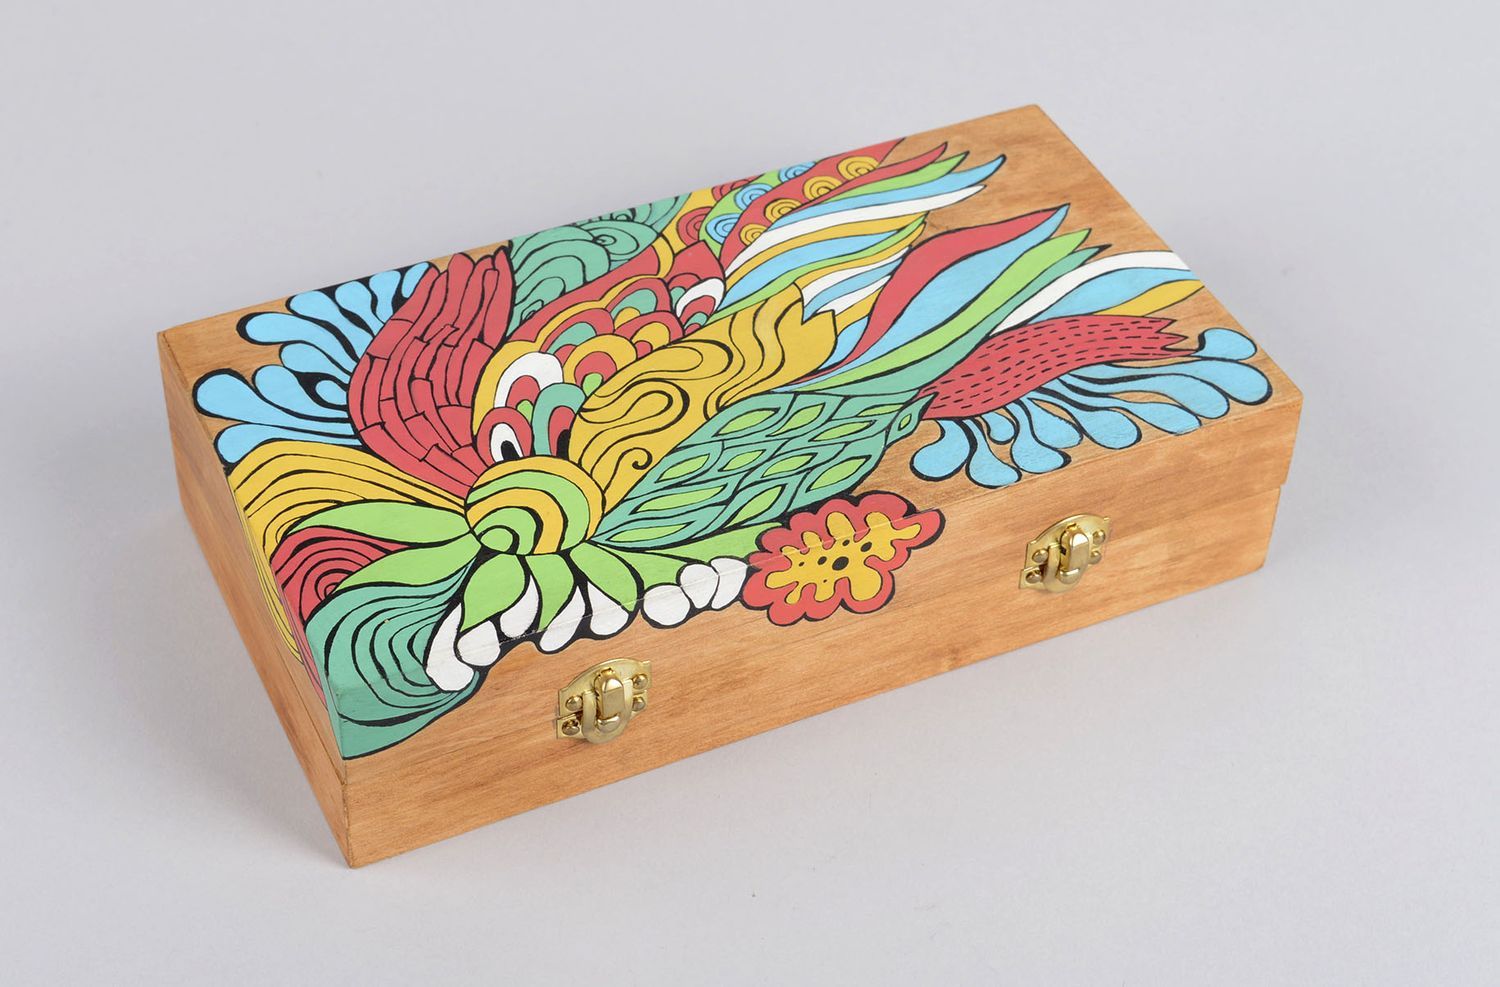 Handmade wooden box jewelry box design modern living room gifts for her photo 5